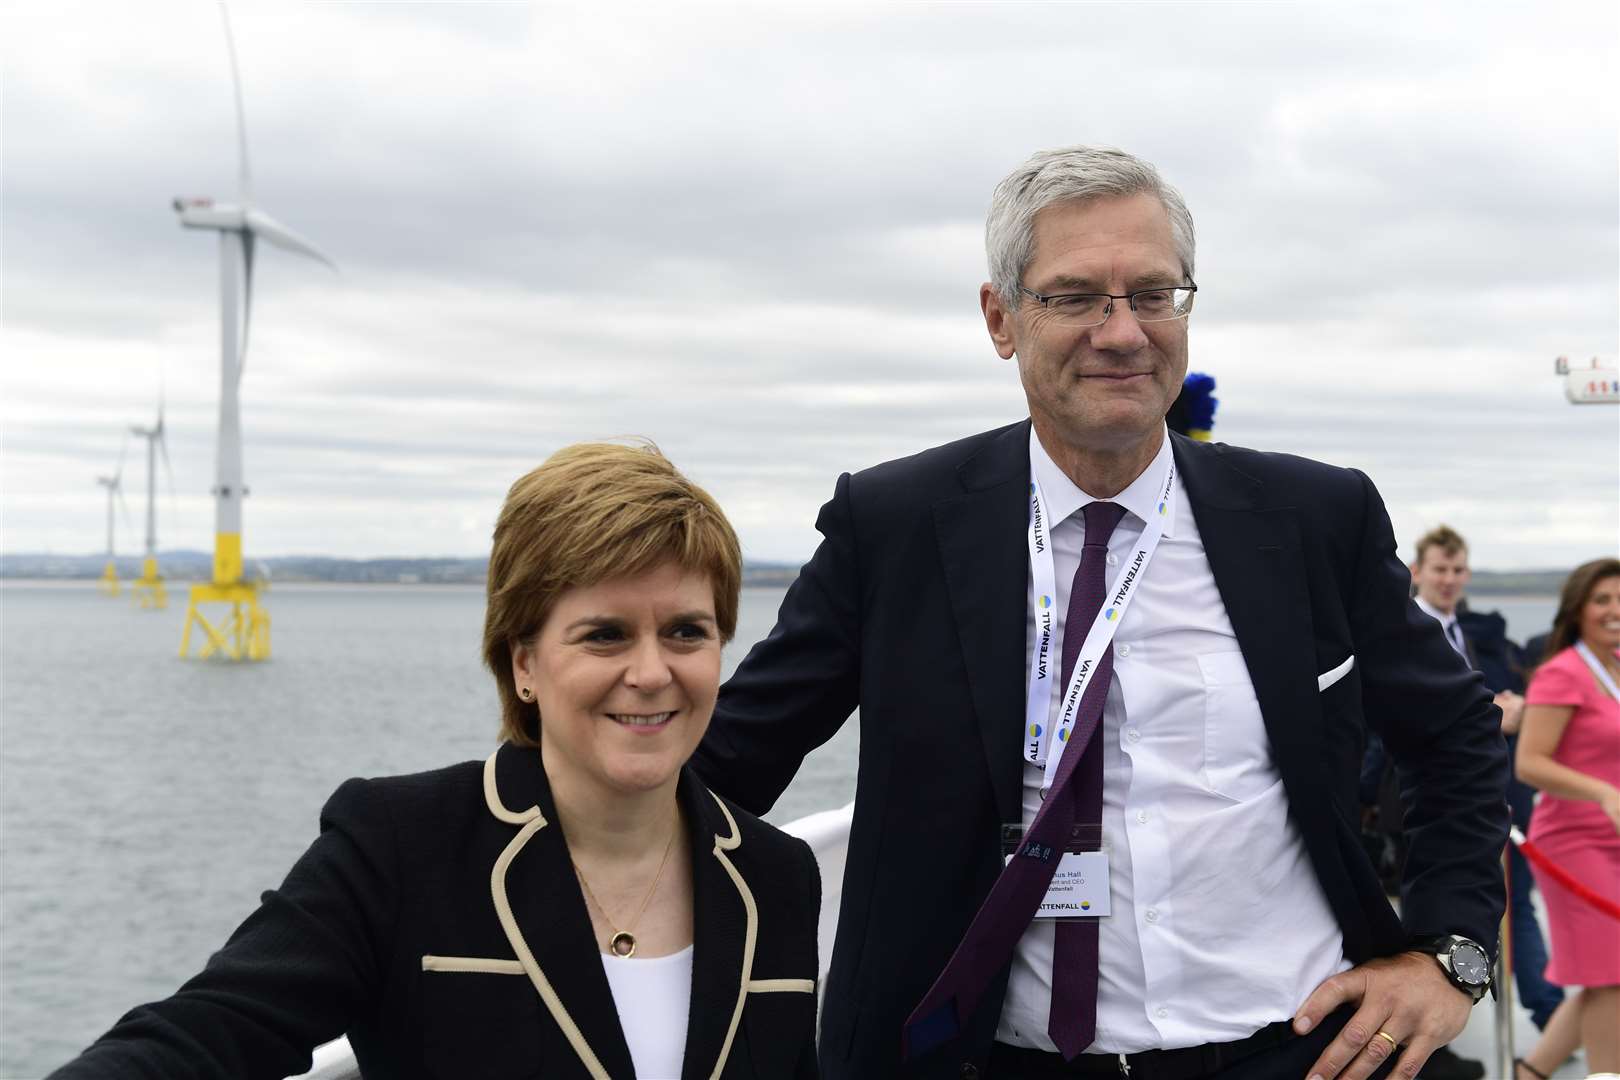 Nicola Sturgeon at the official opening of the European Offshore Wind Deployment Centre in Aberdeen Bay.